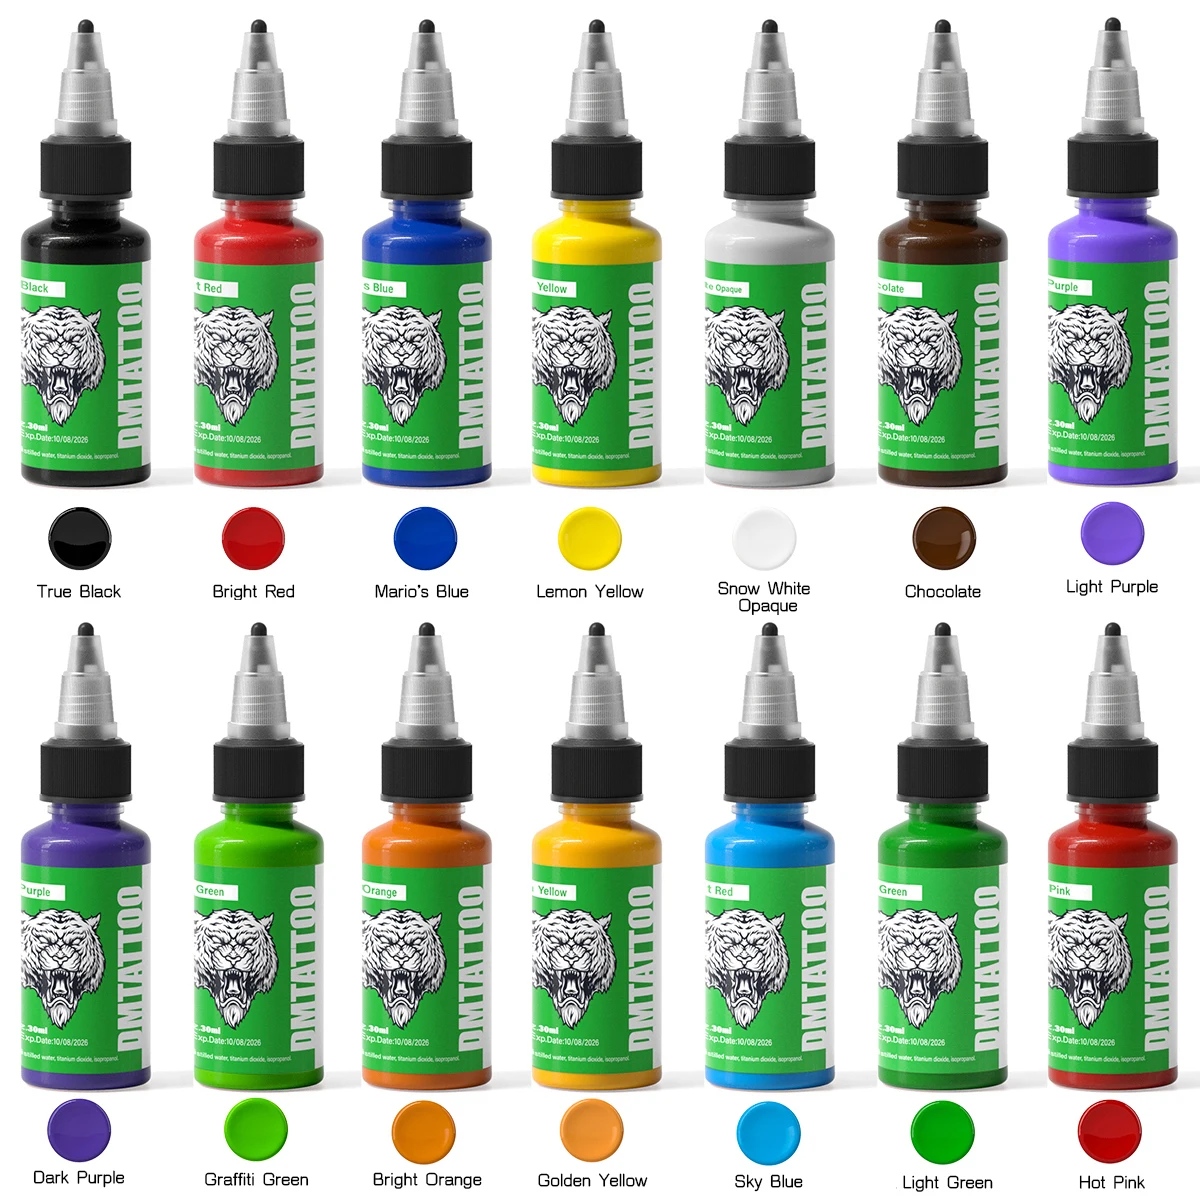 30ml/Bottle Tattoo Ink Set 14 Colors Professional Natural Plant Black Tattoo Pigments Kit for Permanent Body Art Painting kodak mineral traditional chinese painting pigments natural pigments concentrated paste pigments 24 colors